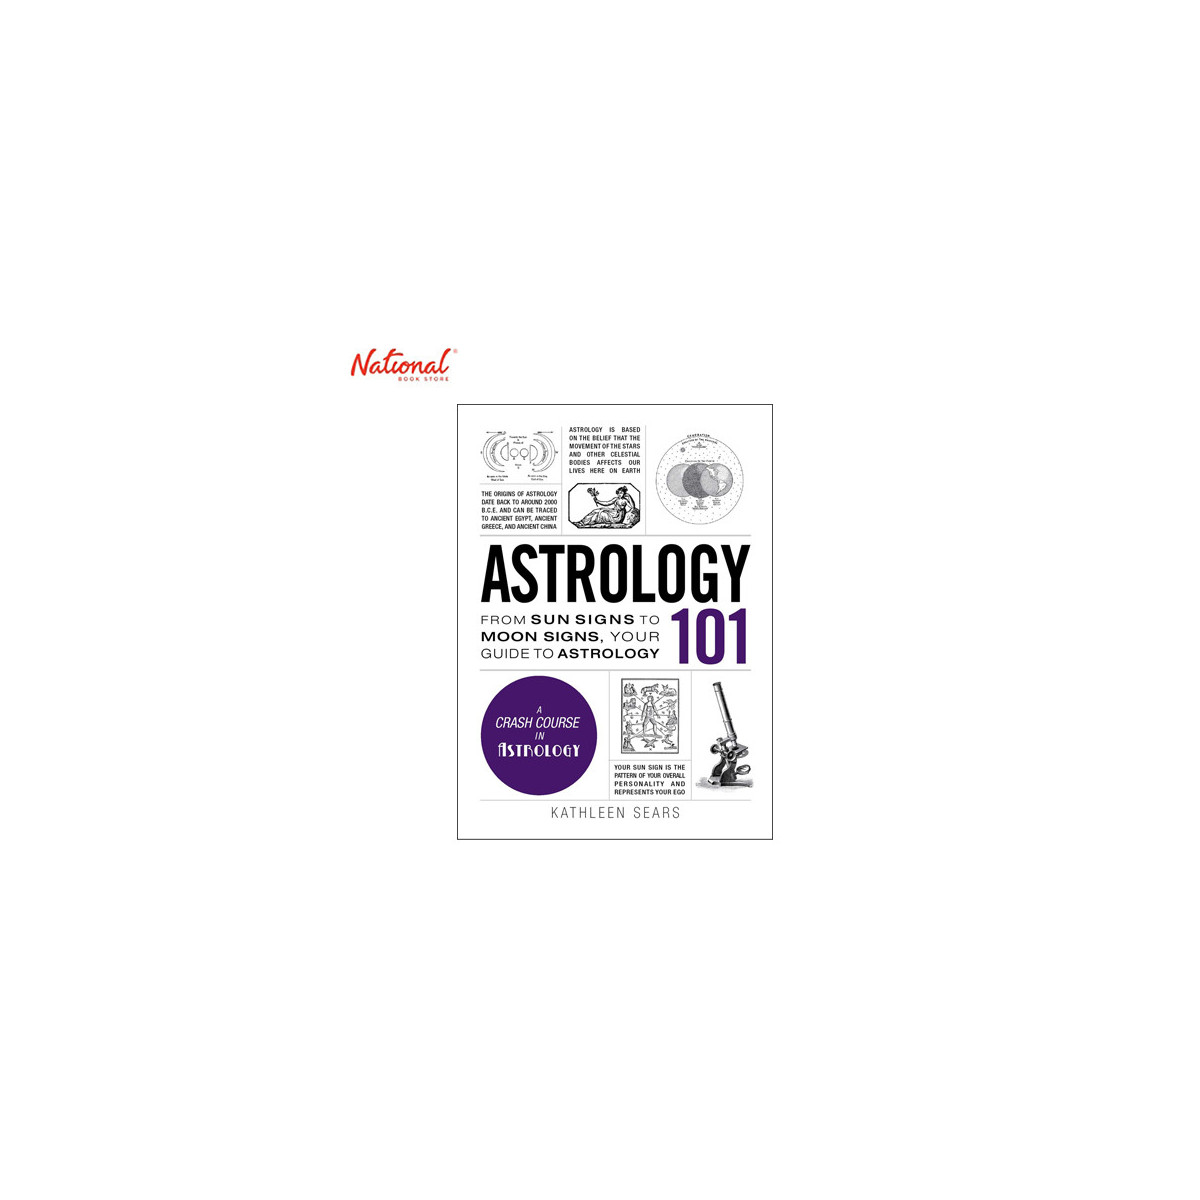 Astrology 101 Hardcover by Kathleen Sears